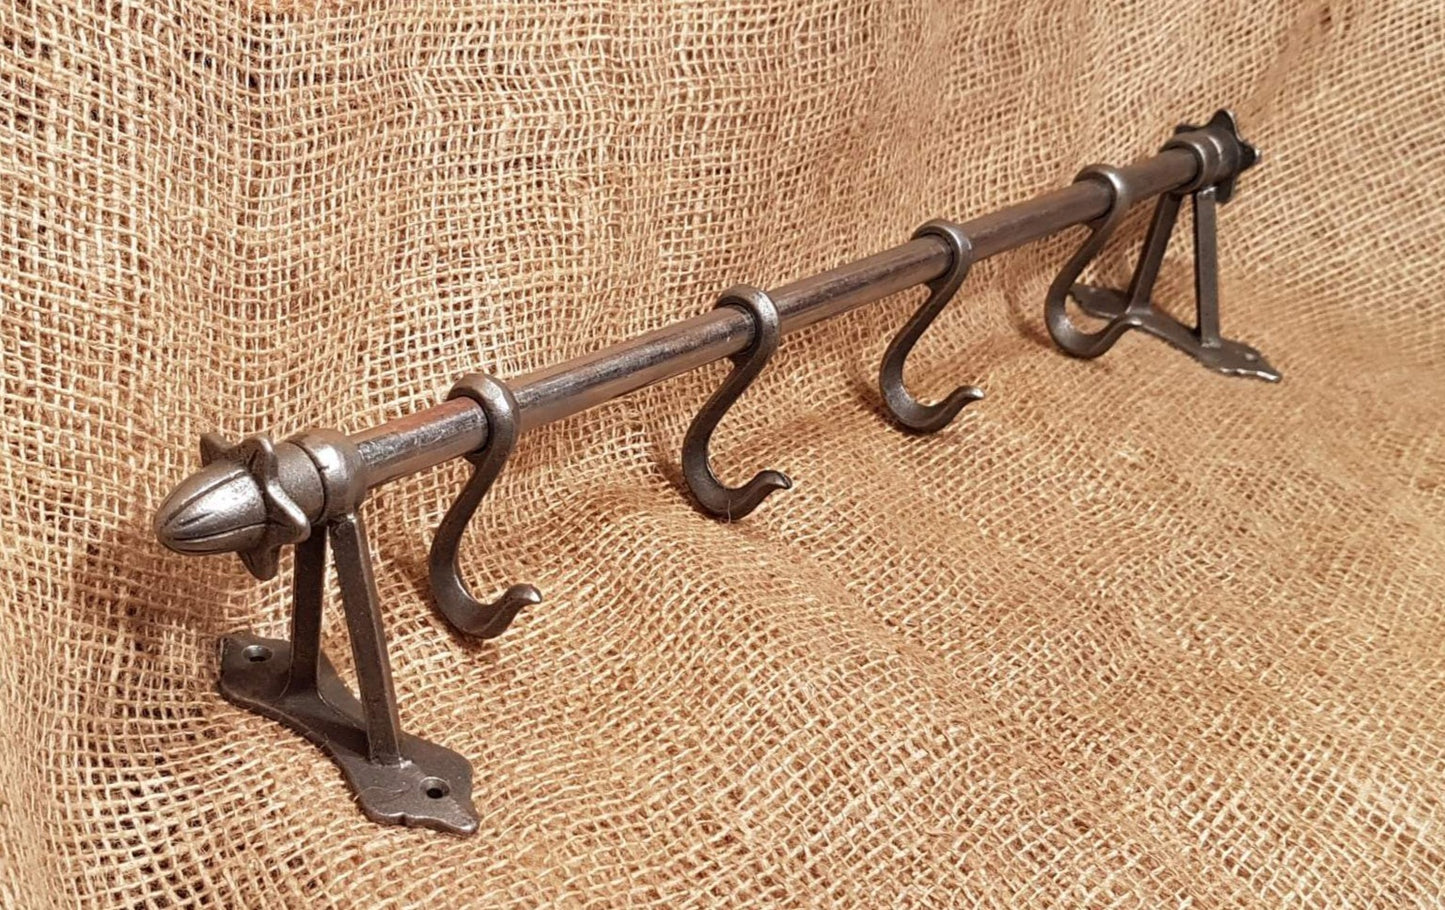 Vintage Hook Rail - 20" - Spearhead Collection - Rails & Rings - Hardware, Home Decor, Hook Rails, Hooks, Kitchen Decor, Rails Rings & Eye Loops, Rods and Rails